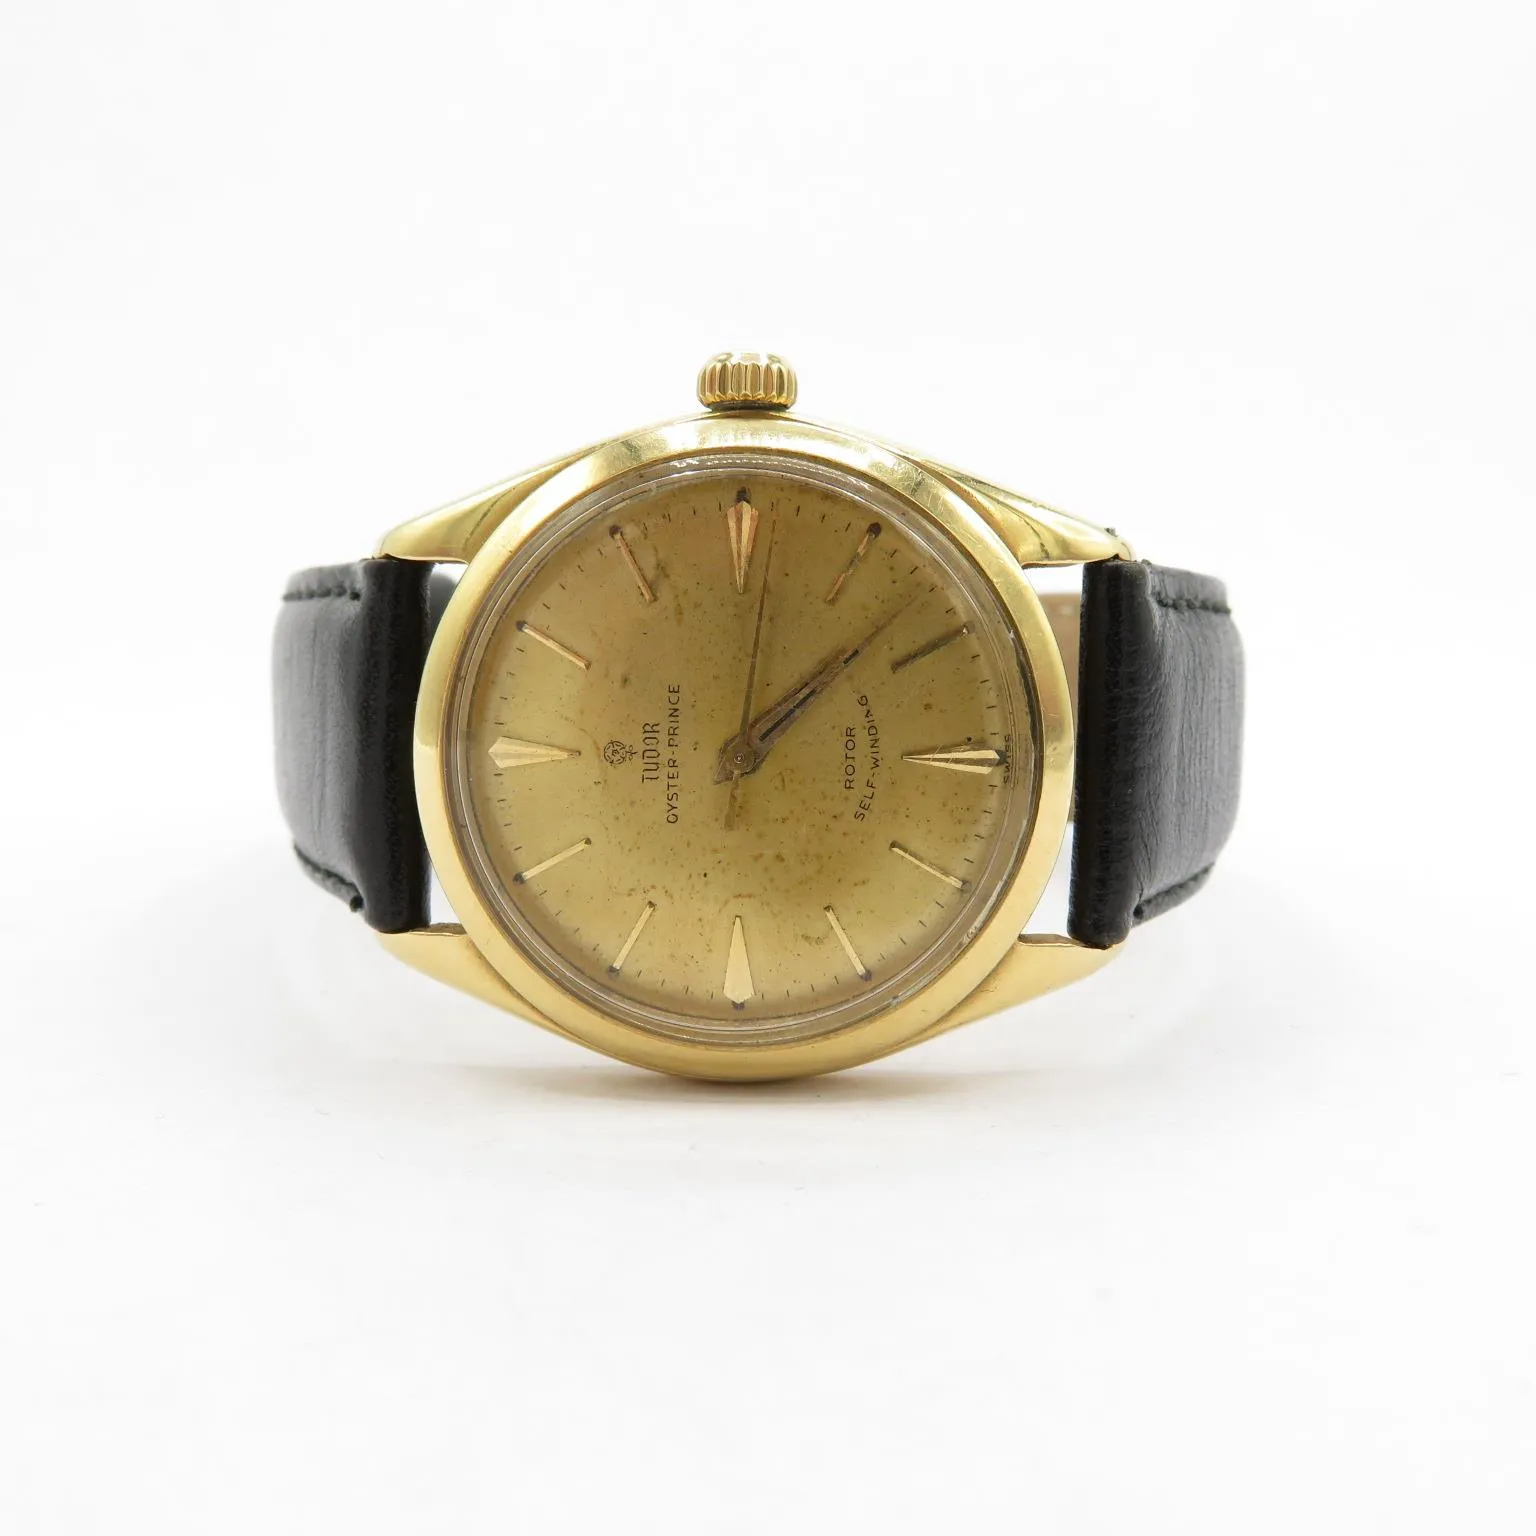 Tudor Oyster Prince 7965 nullmm Yellow gold 4